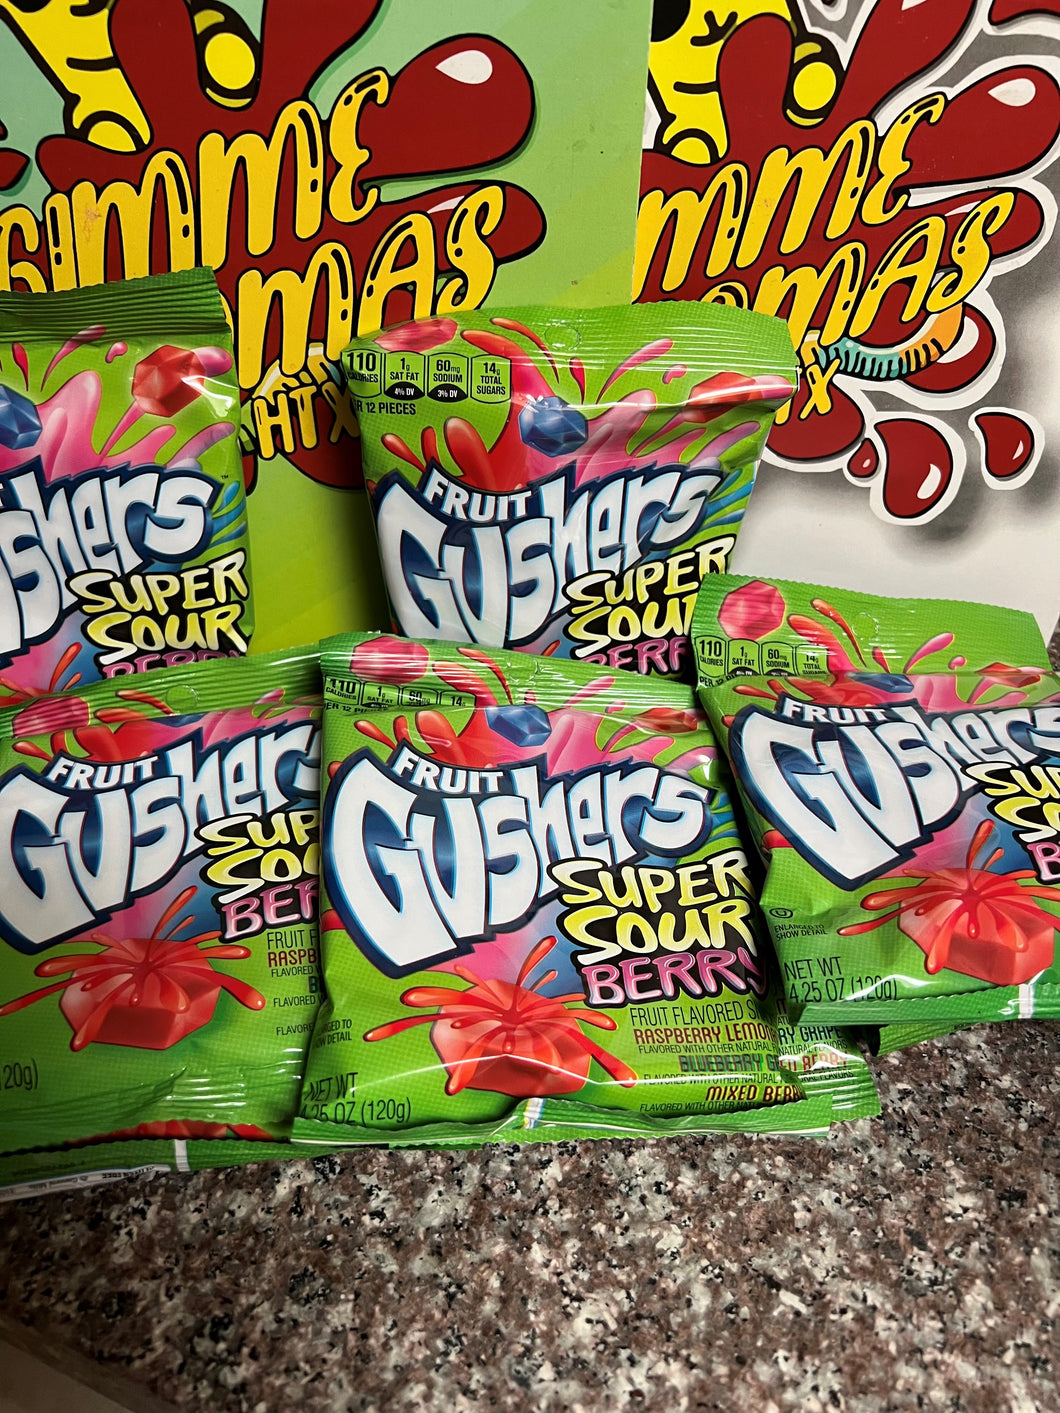 SUPER-SOUR GUSHERS